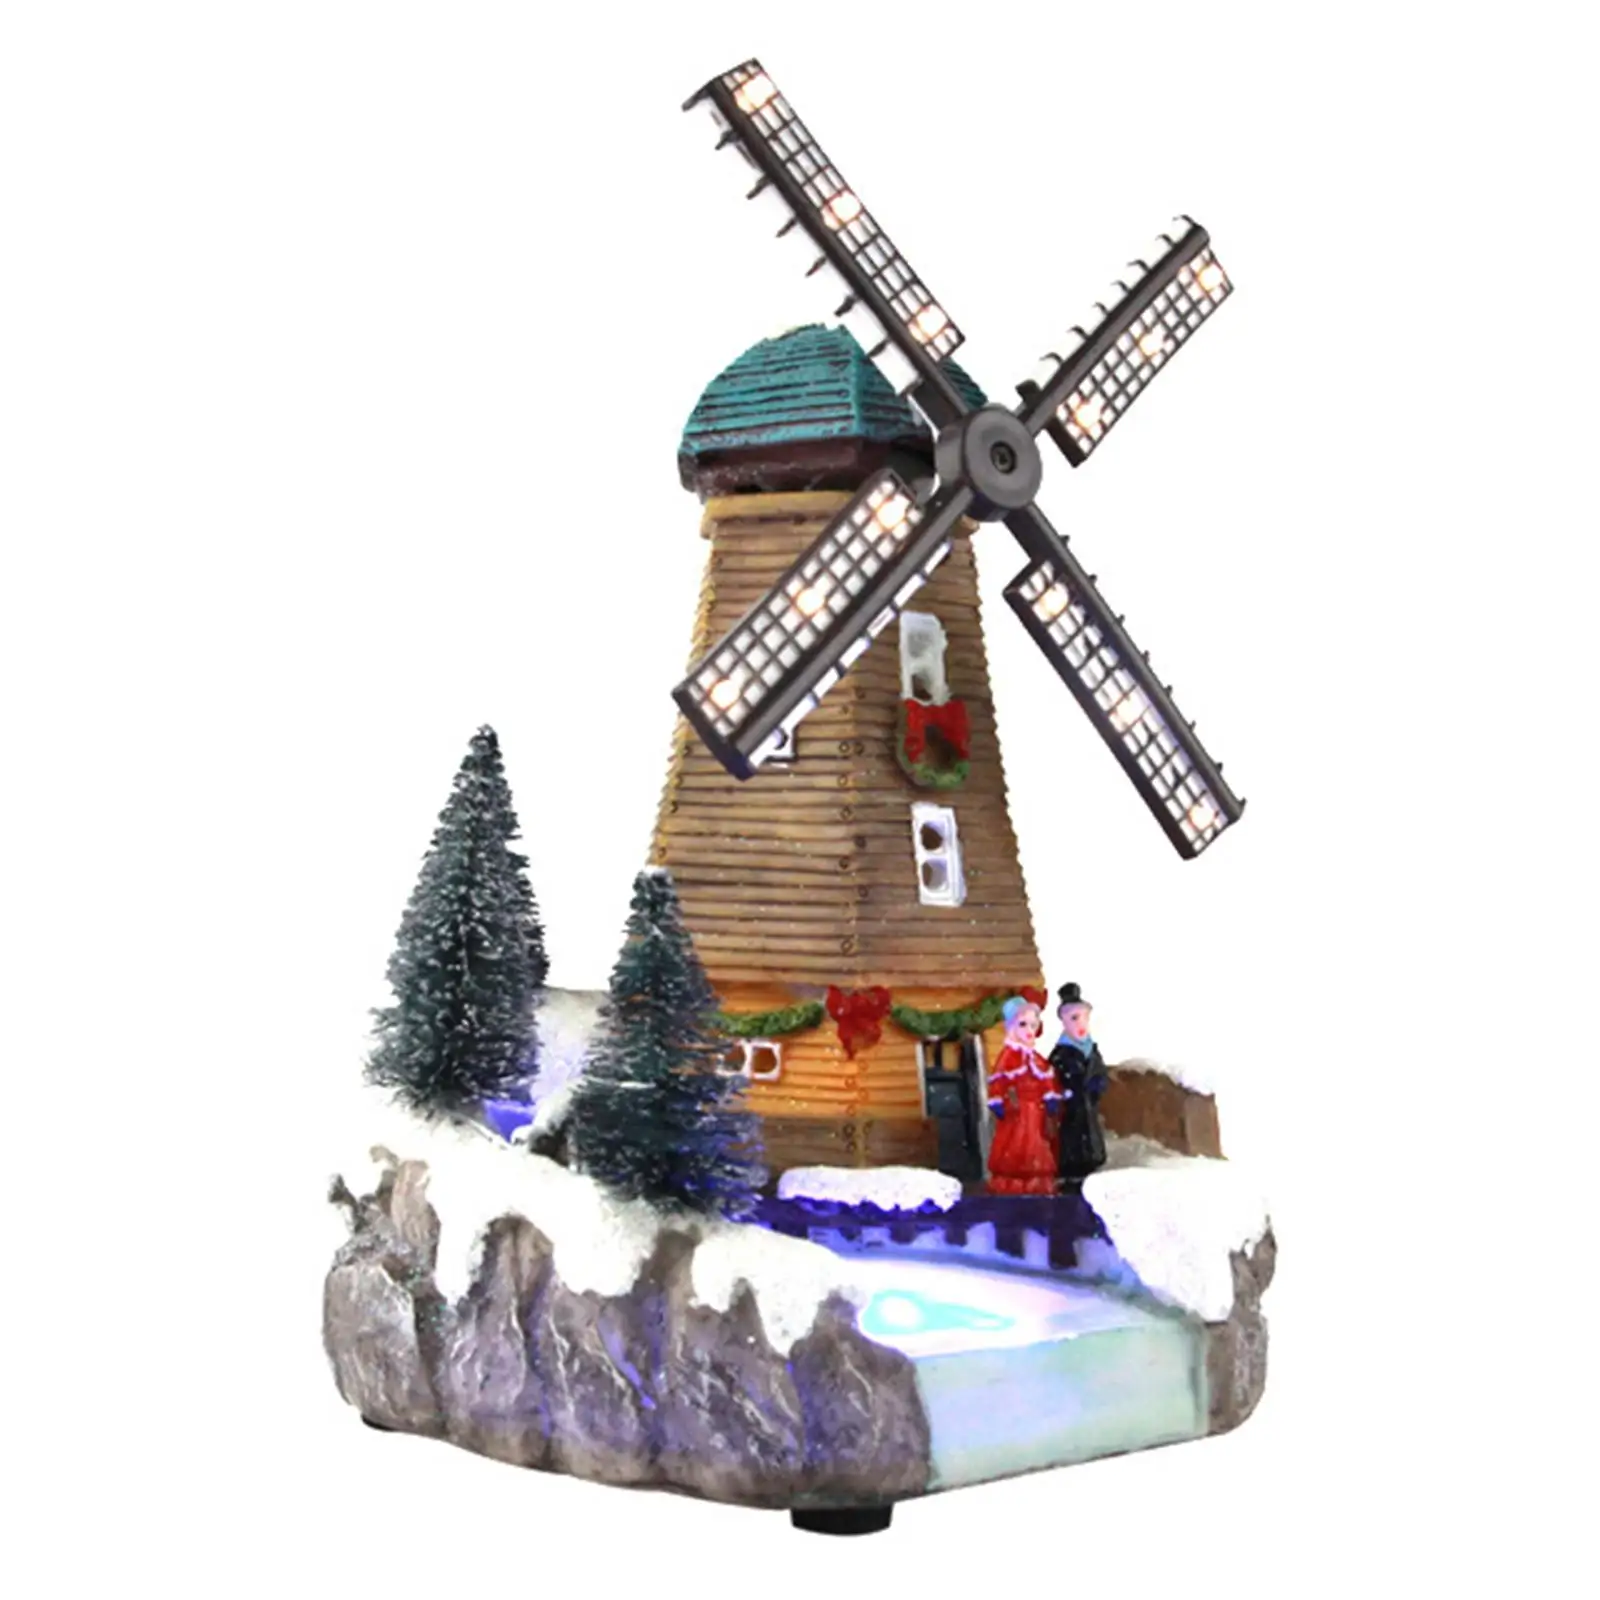 LED Lighted Christmas Village Windmill Crafts Resin Musical Box Building Sculpture for Office Living Room Desk Bedroom Fireplace